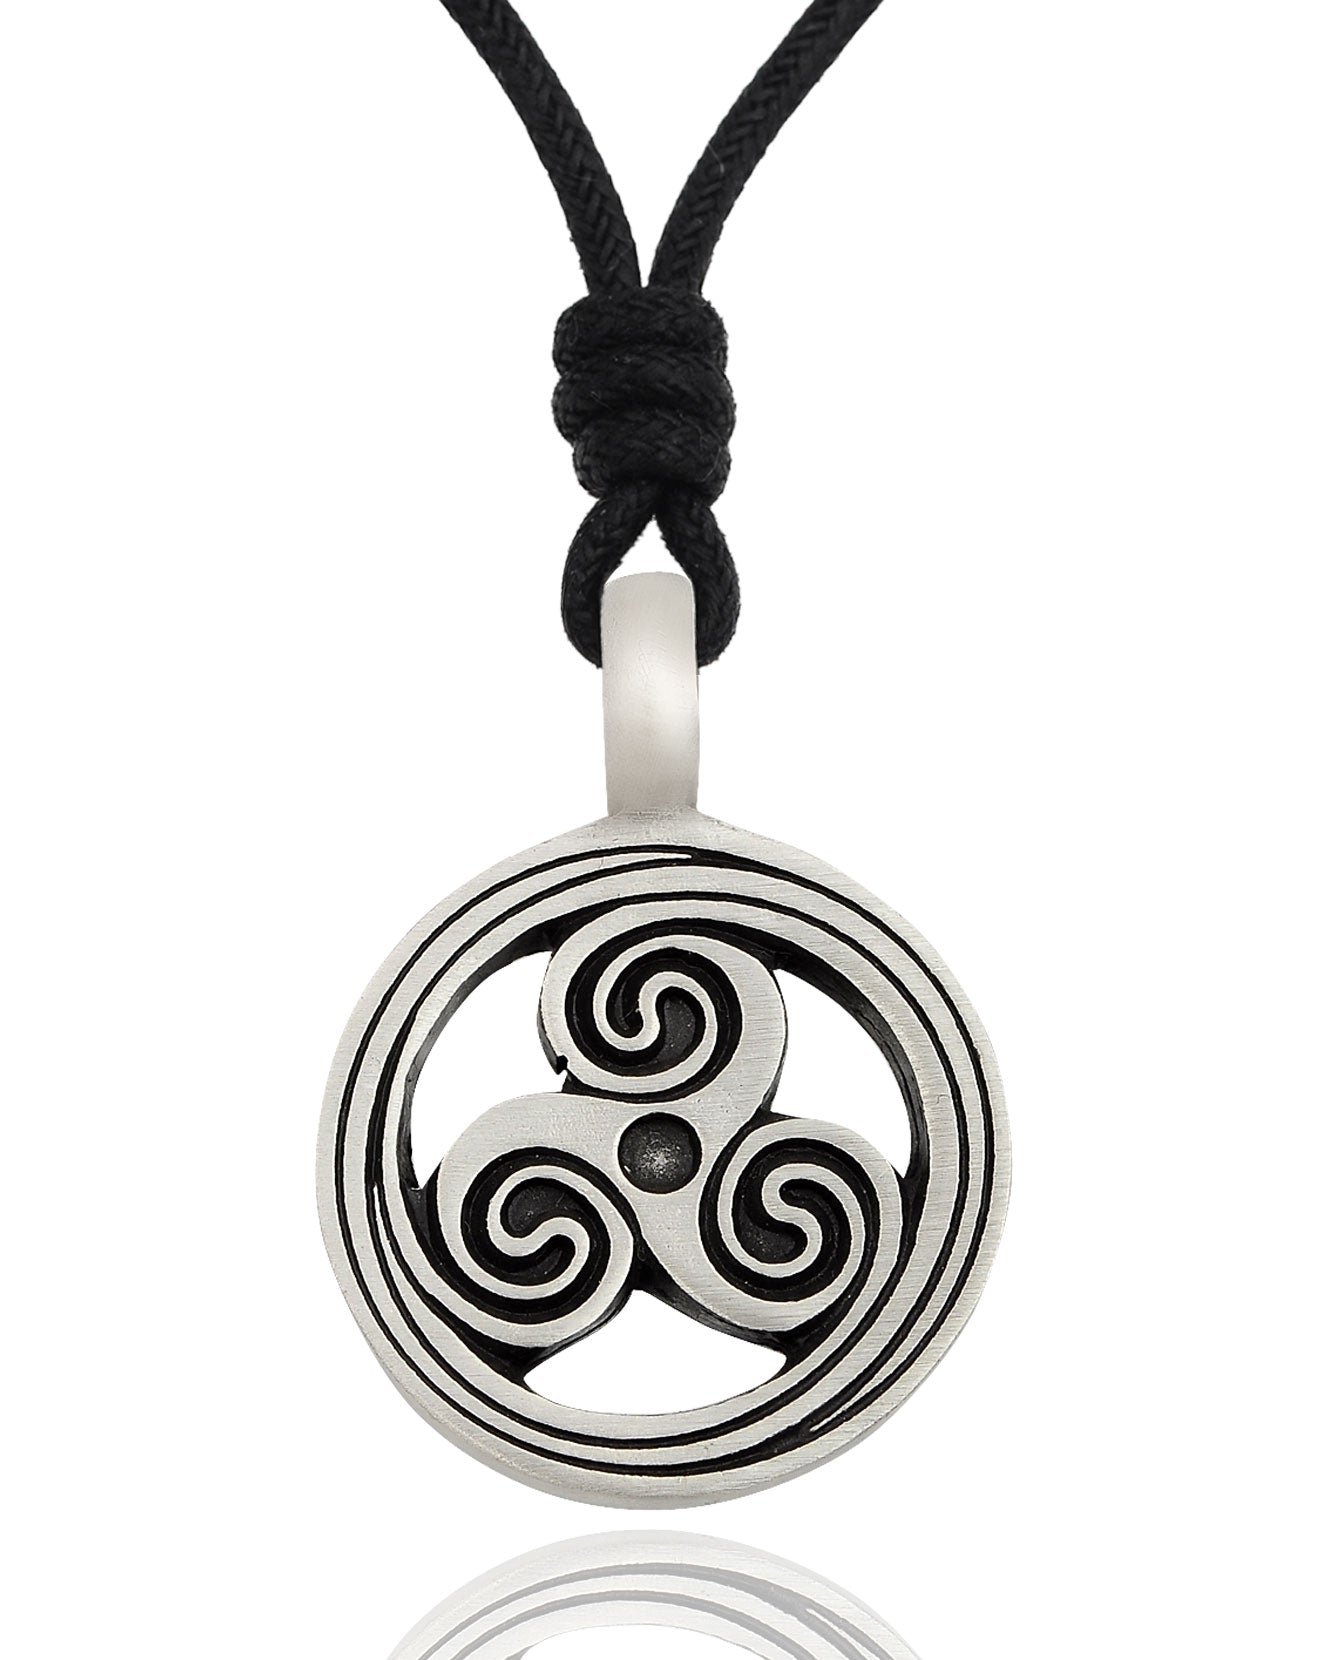 New Triquetra Trilogy Wheel Silver Pewter Charm Necklace Pendant Jewelry